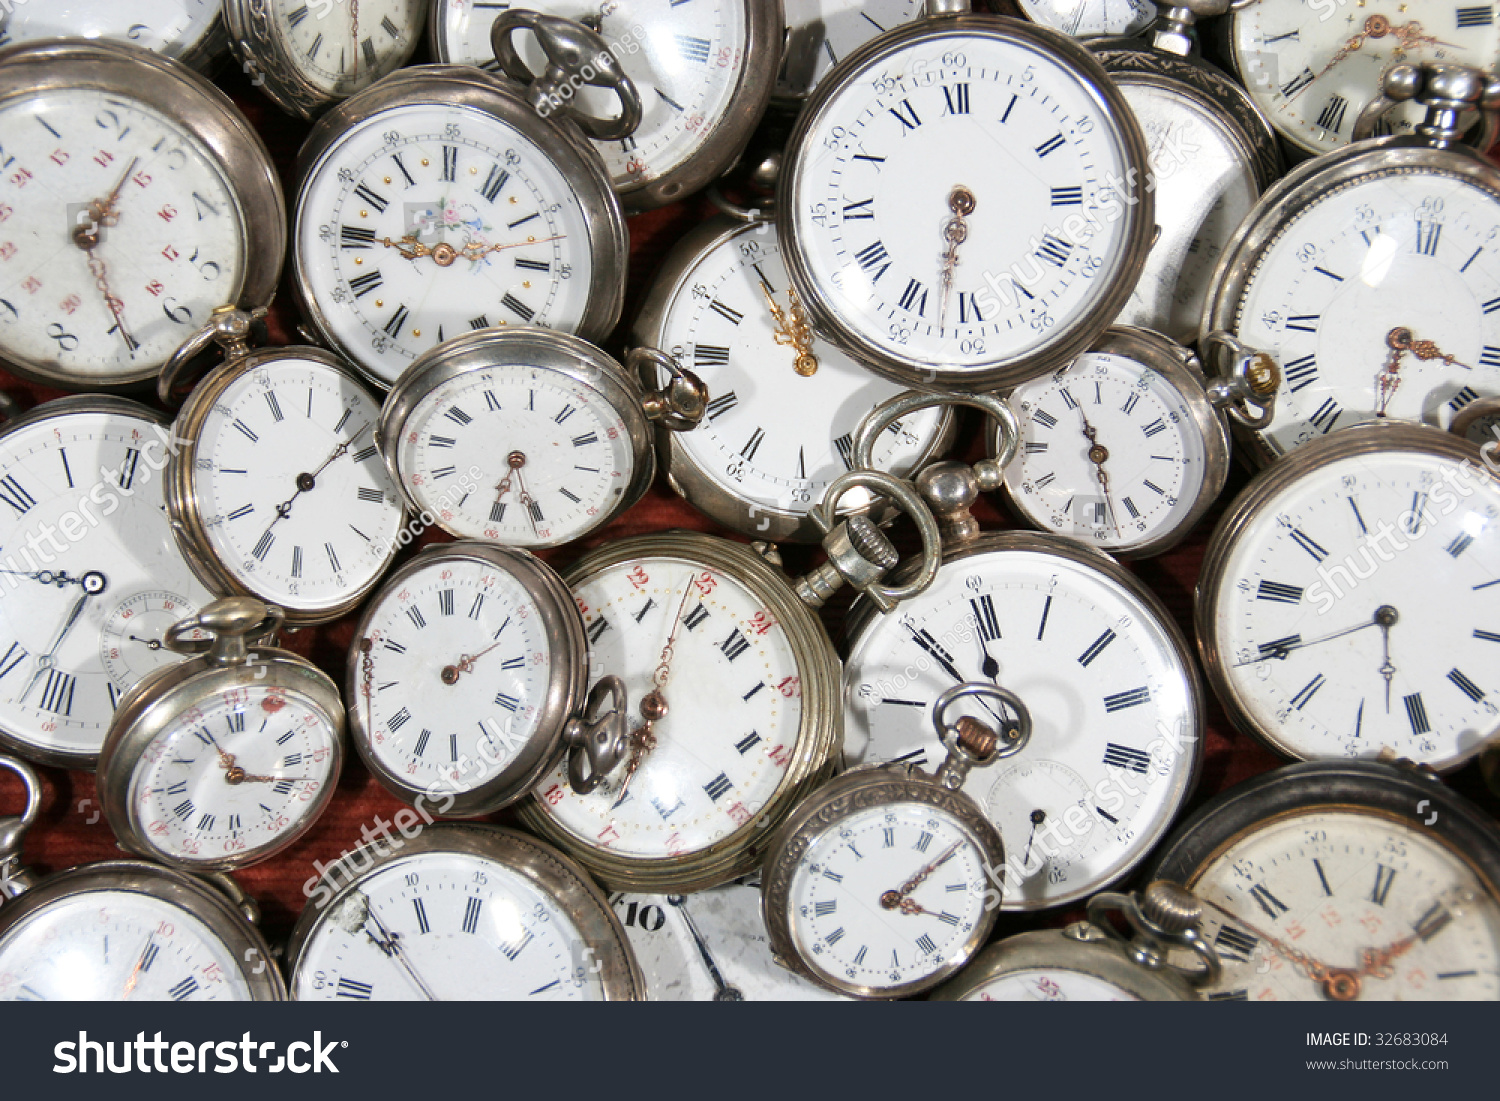 stock-photo-meanwhile-pocket-watch-hour-minute-second-past-rustic-old-collection-clock-stopwatch-32683084.jpg